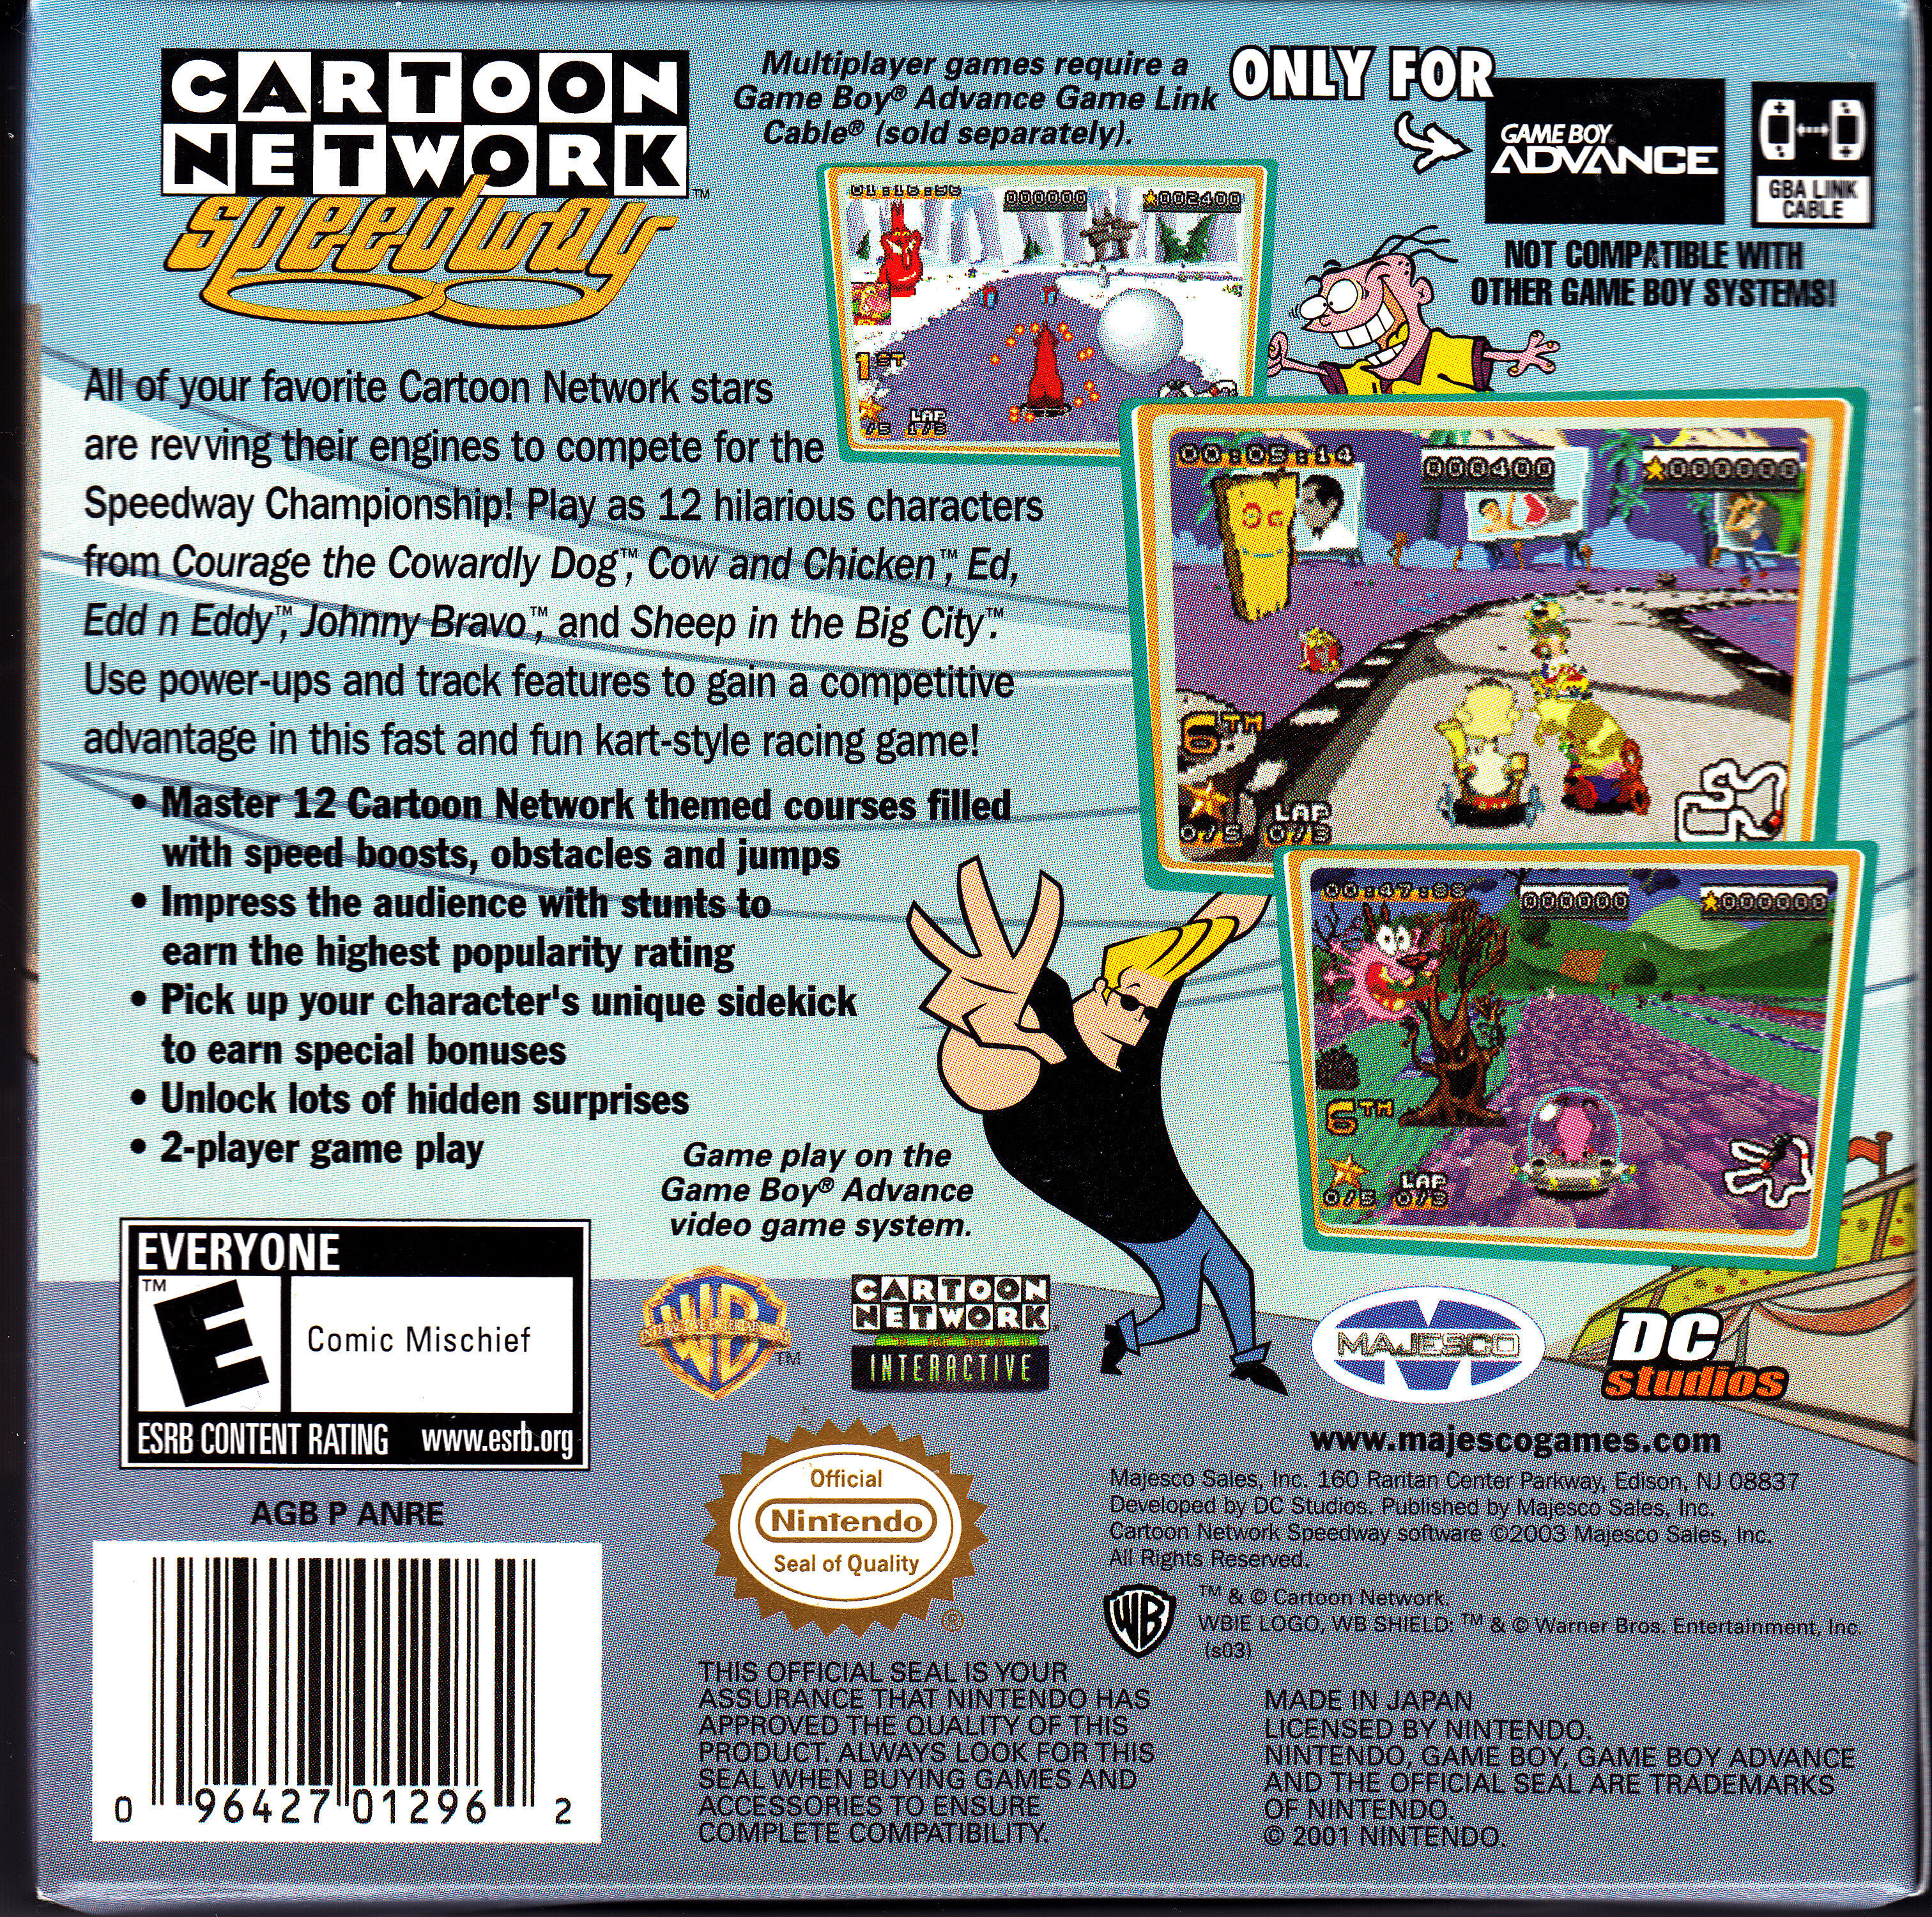 What was YOUR favorite Cartoon Network game to play